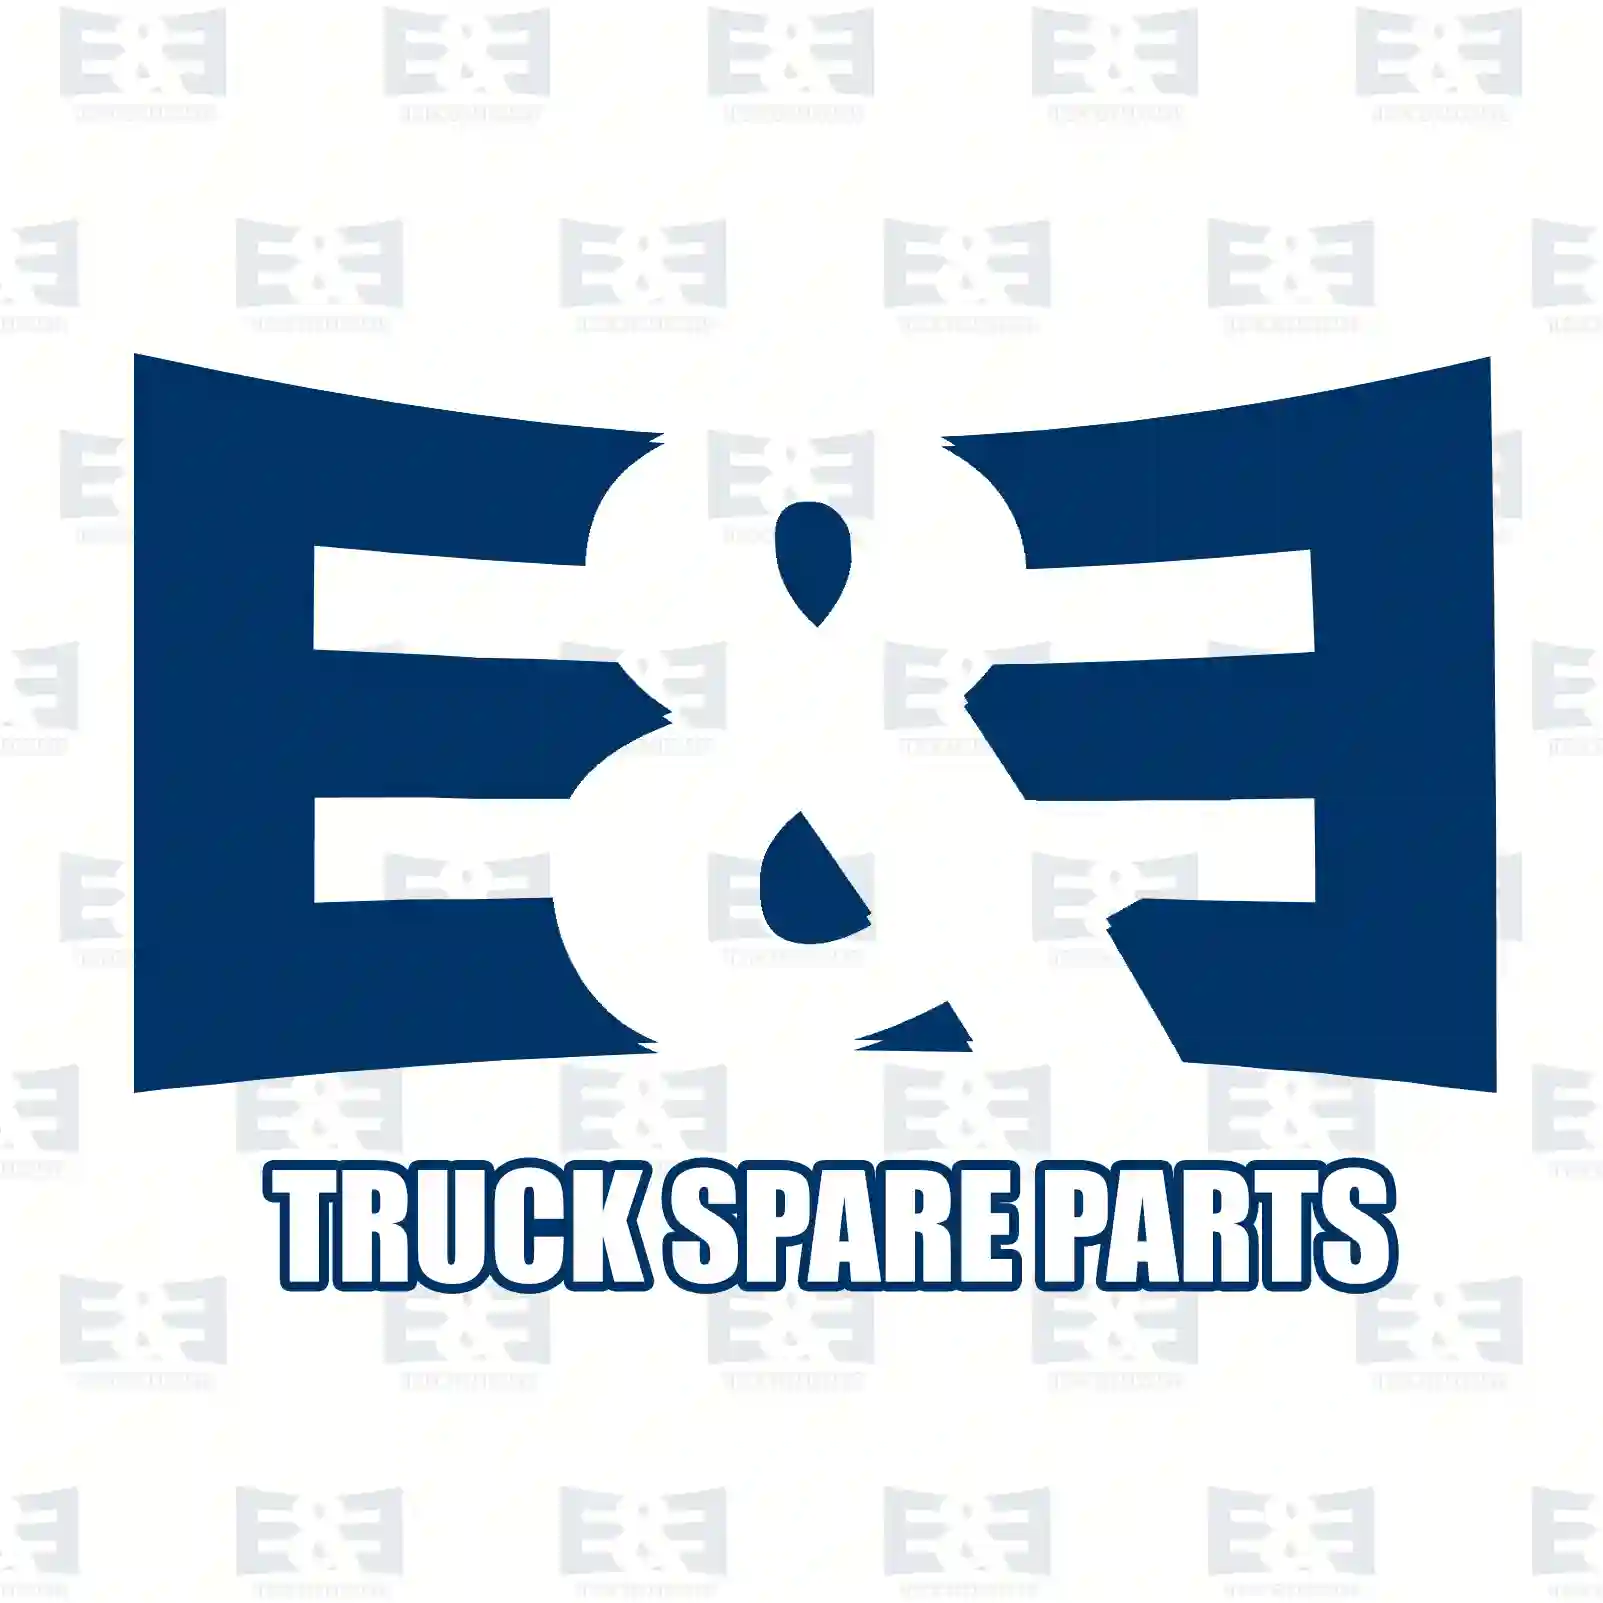  Elbow fitting || E&E Truck Spare Parts | Truck Spare Parts, Auotomotive Spare Parts